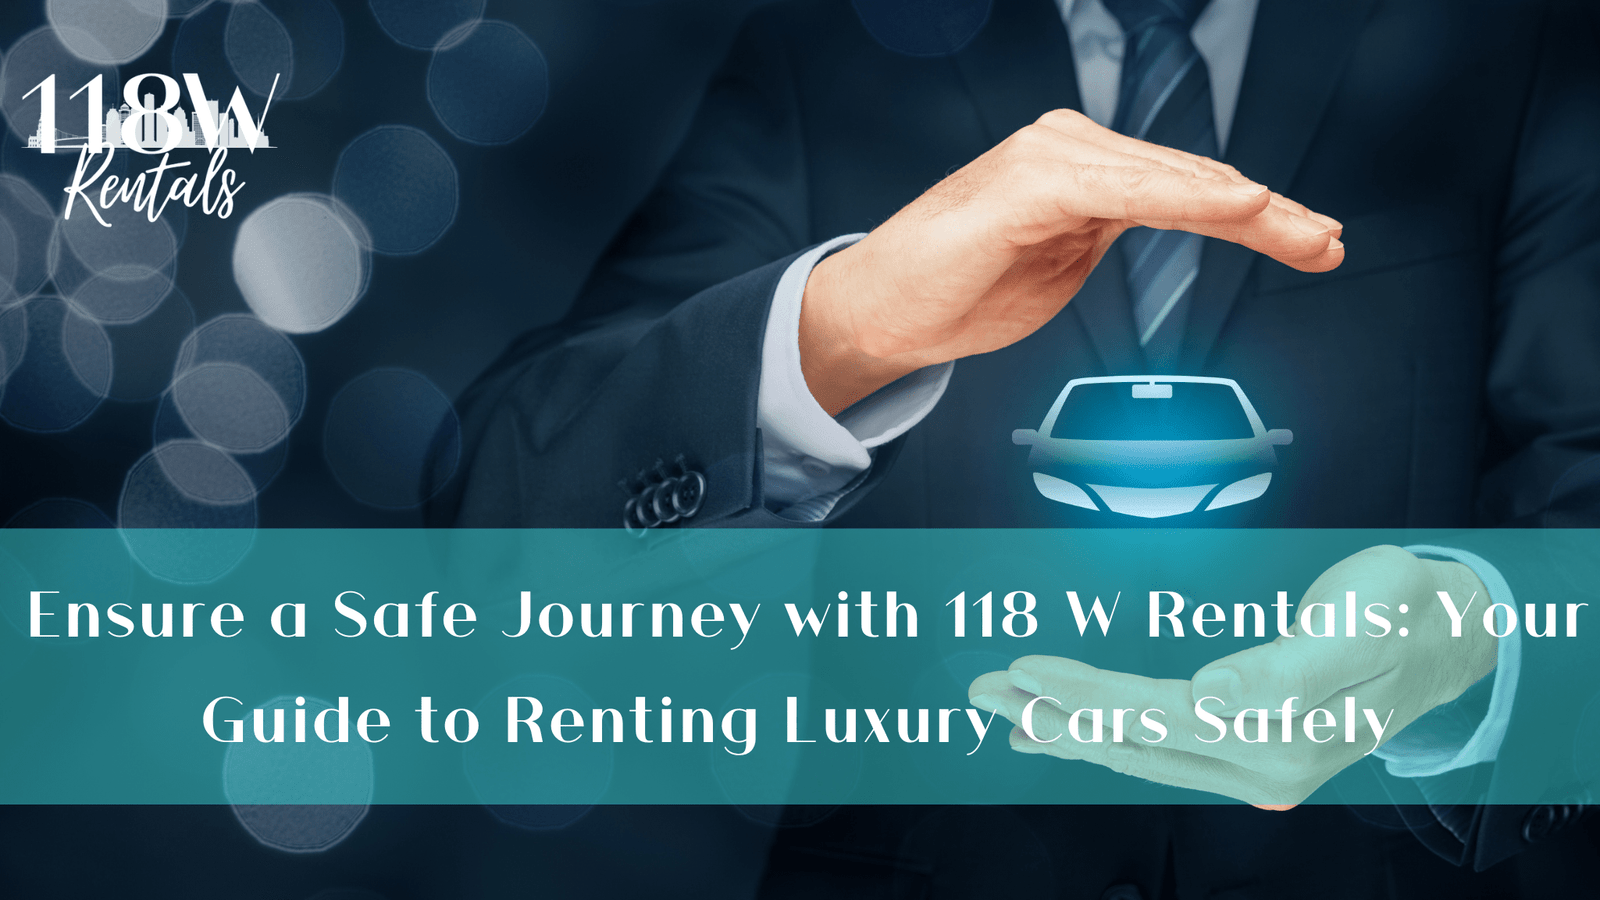 Ensure a Safe Journey with 118 W Rentals: Your Guide to Renting Luxury Cars Safely